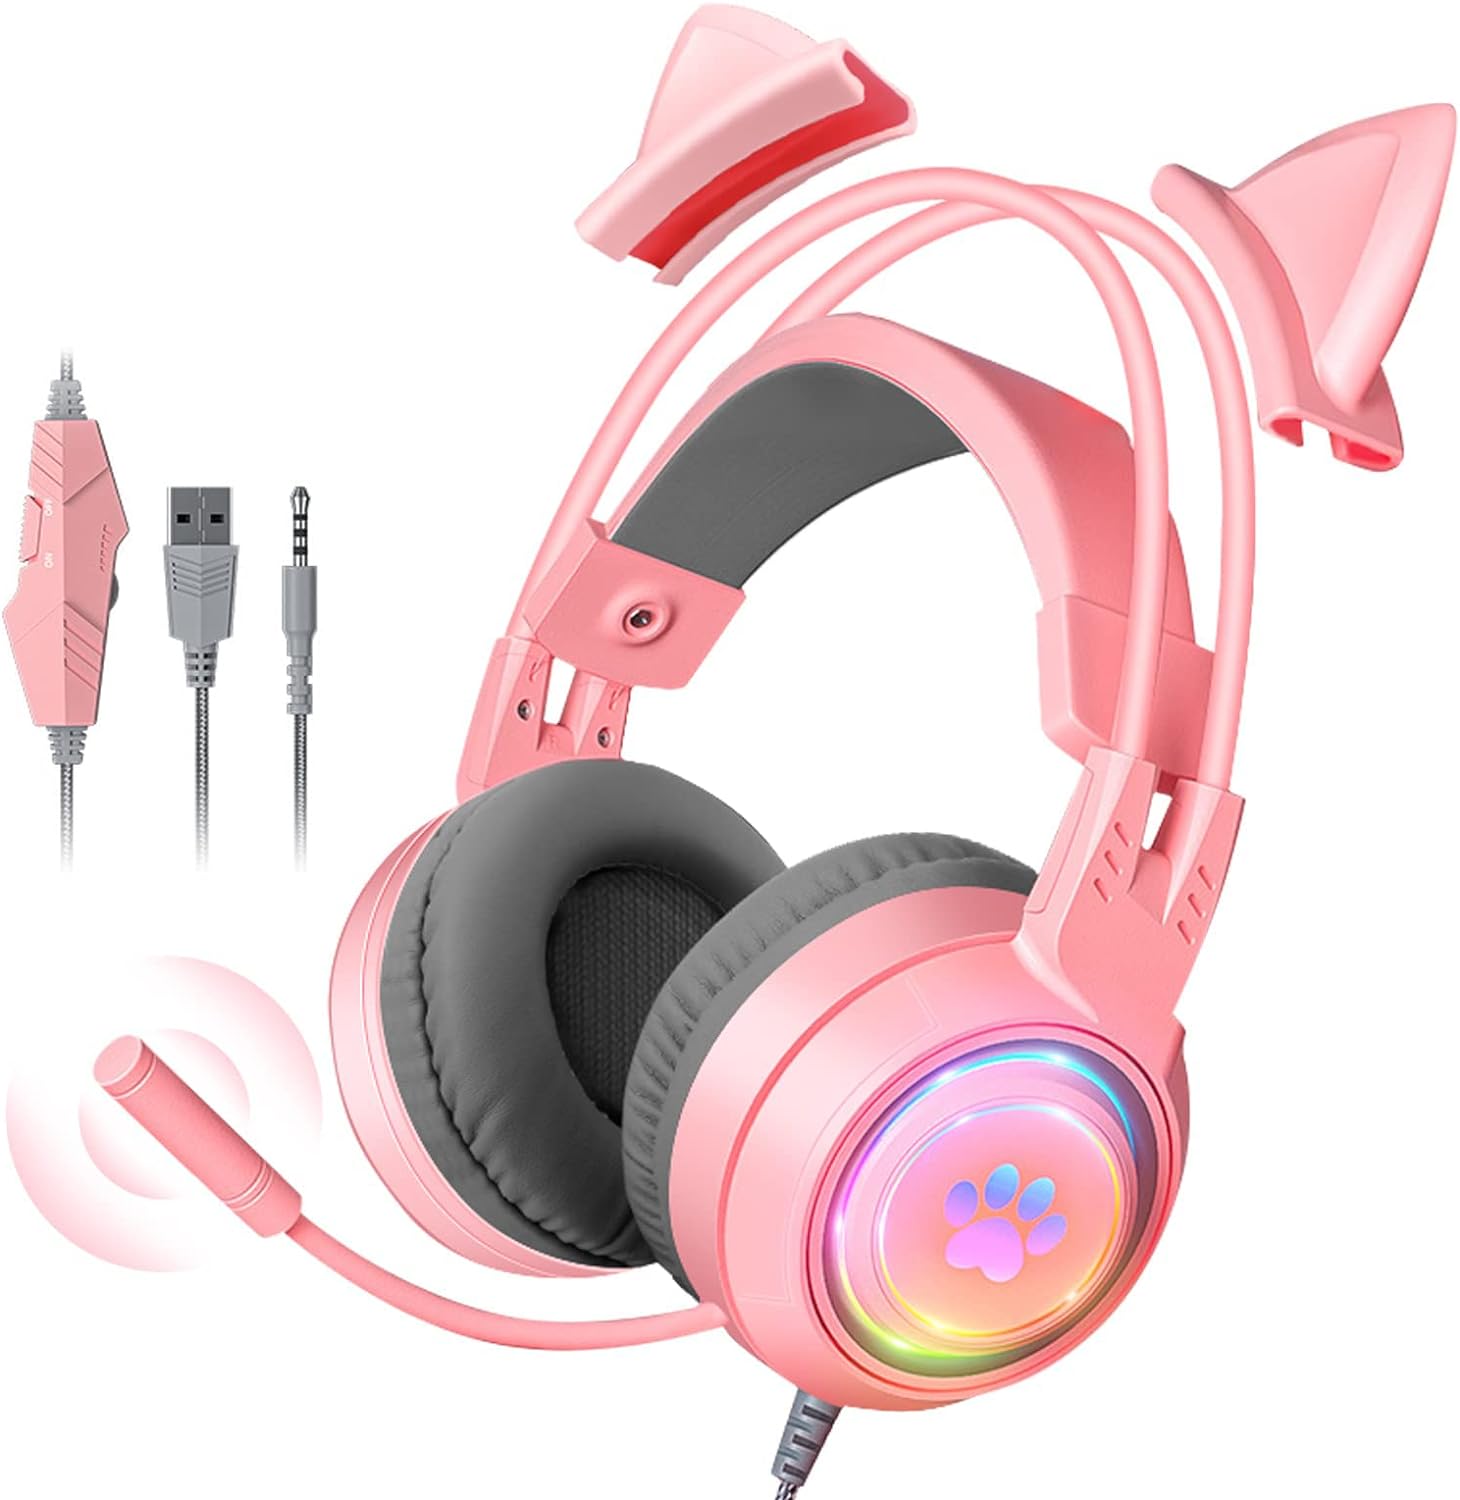 Bluetooth Wireless Headphones, Over Ear Headphones, Cat Ear Kids Gaming Headset with Microphone for Laptop/PC /PS4 /PS5 /Xbox/Nintendo Switch, RGB Light Up 3.5mm Wired USB Headset (Pink)